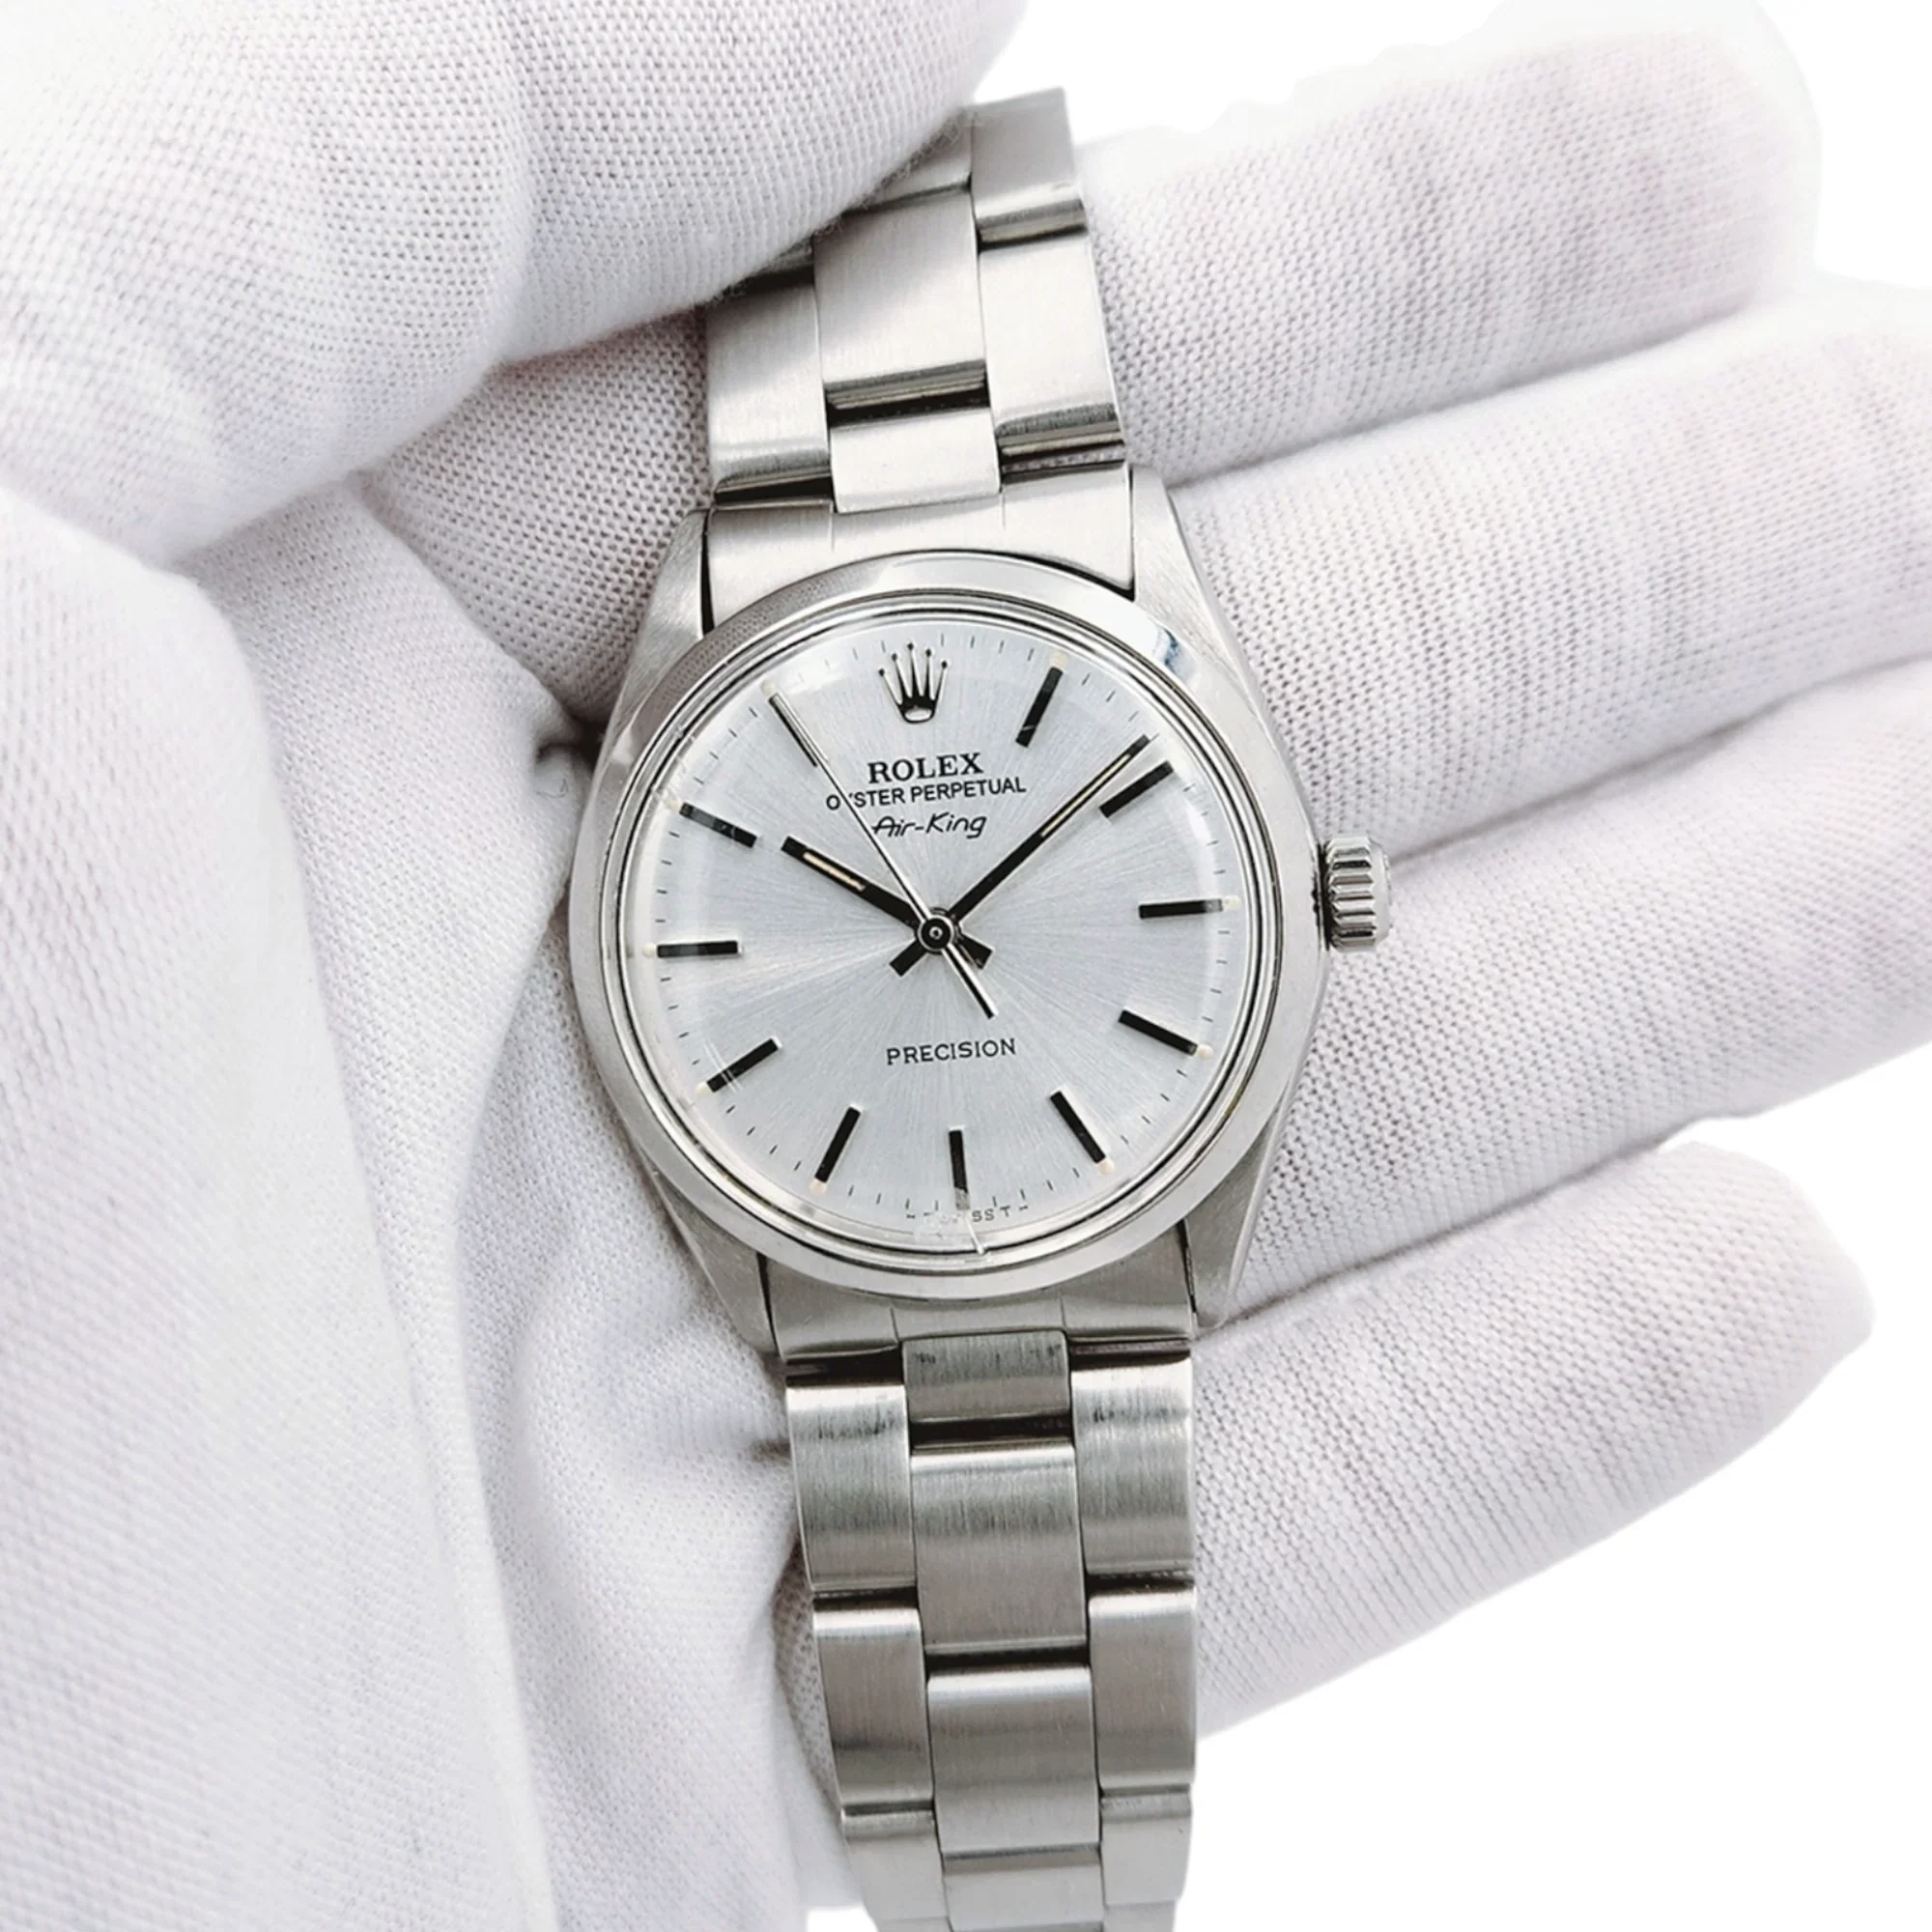 1970 Men's Rolex 34mm Air-King Vintage Oyster Stainless Steel Wristwatch w/ Silver Dial & Smooth Bezel. (Pre-Owned 5500)